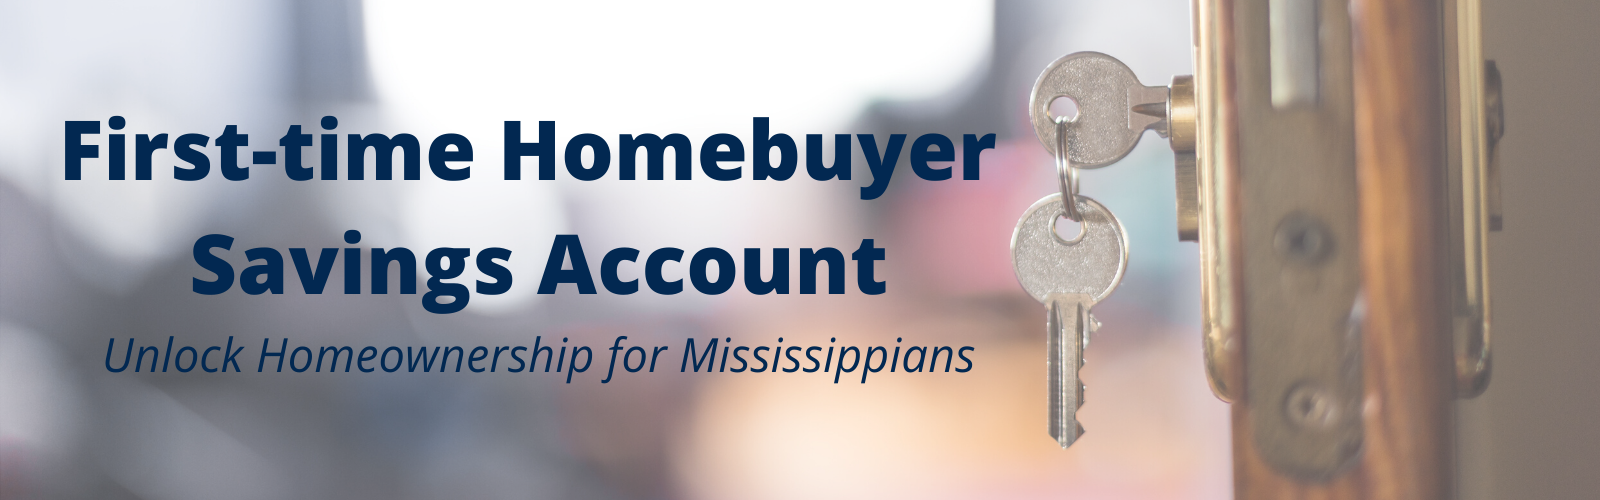 First-time Homebuyer Savings Account